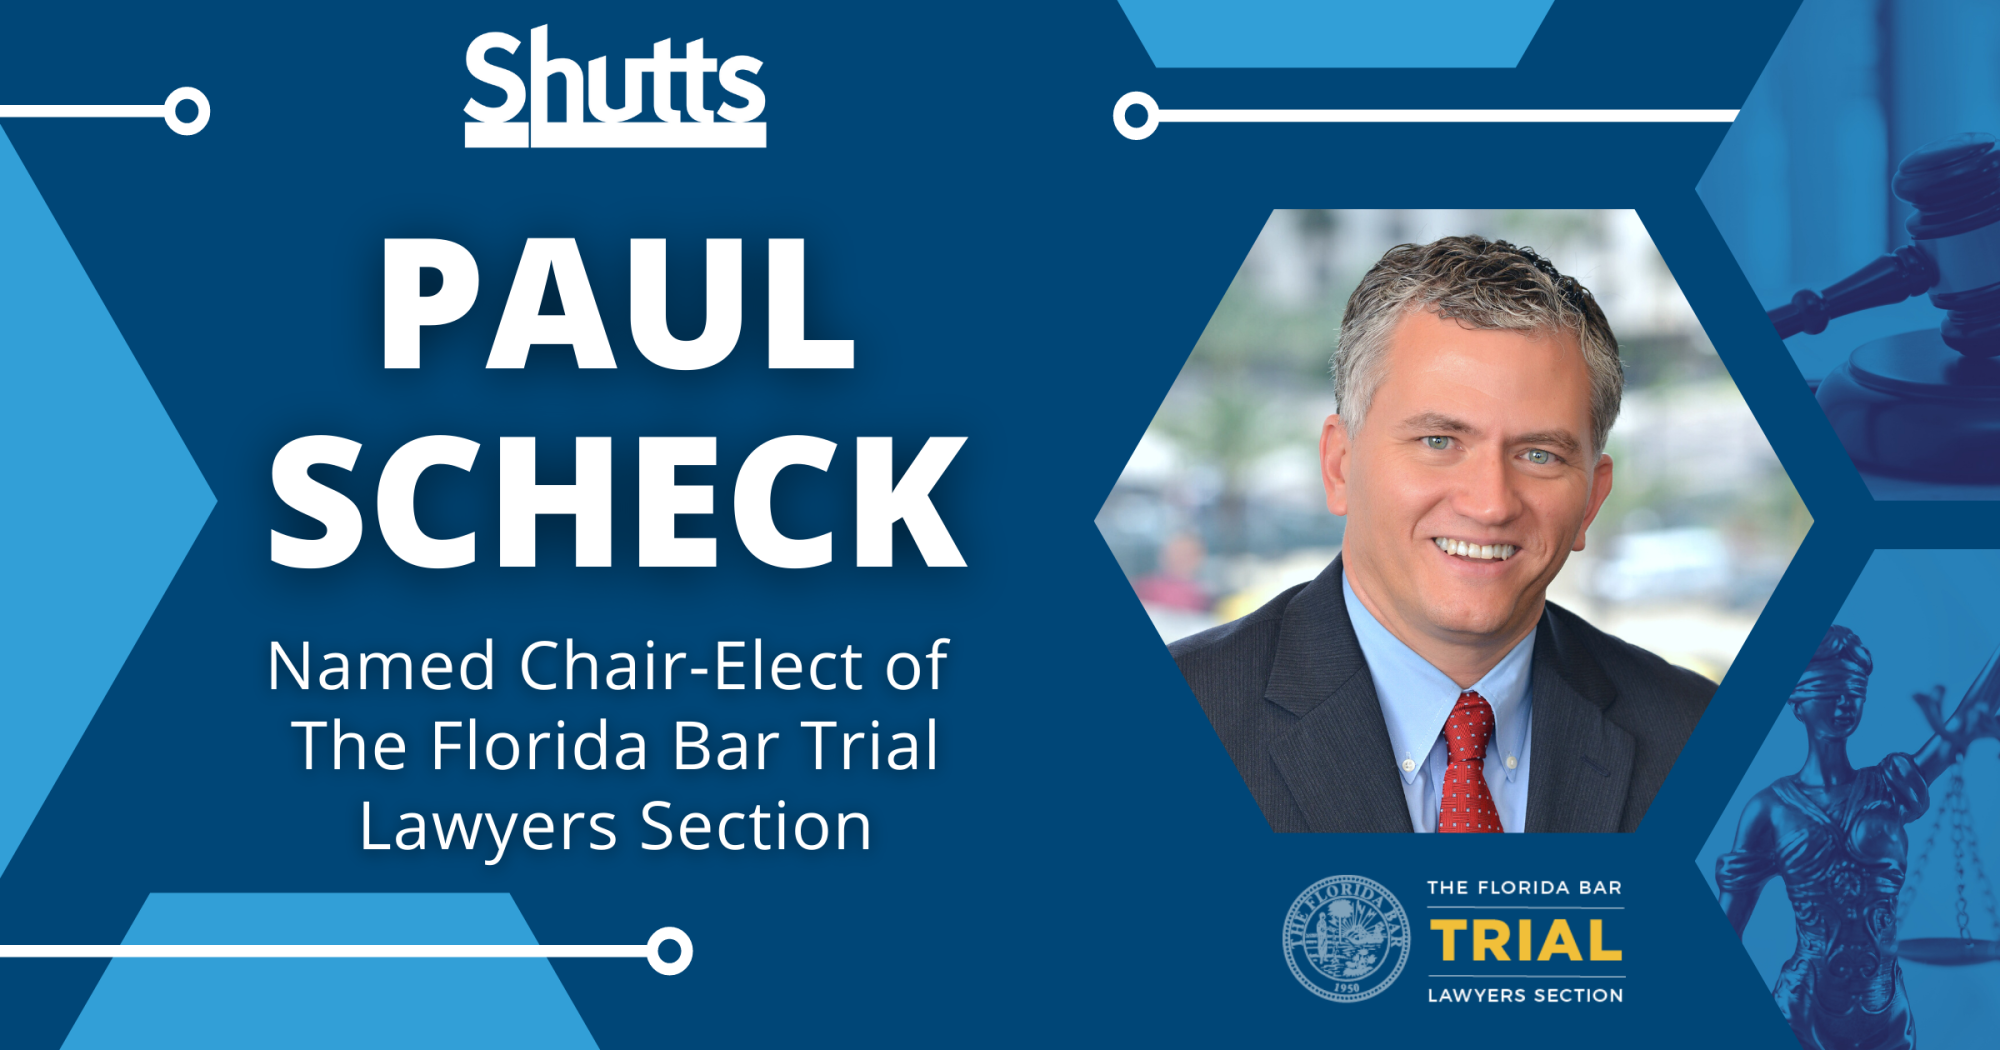 Paul Scheck Named Chair-Elect of The Florida Bar Trial Lawyers Section